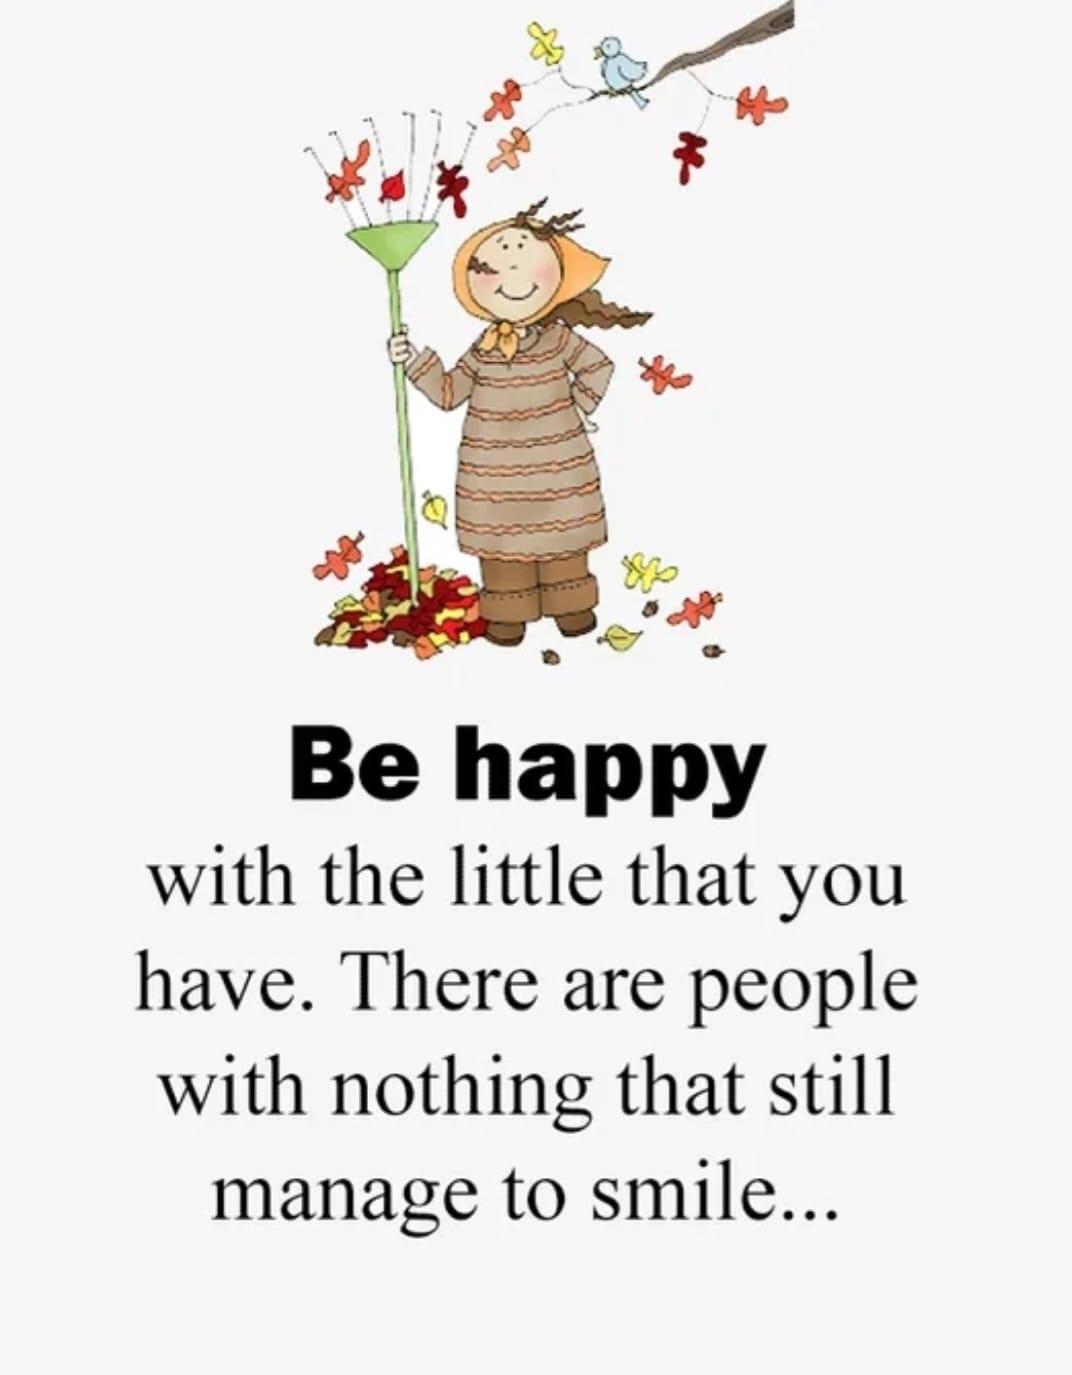 Be happy with the little that you have